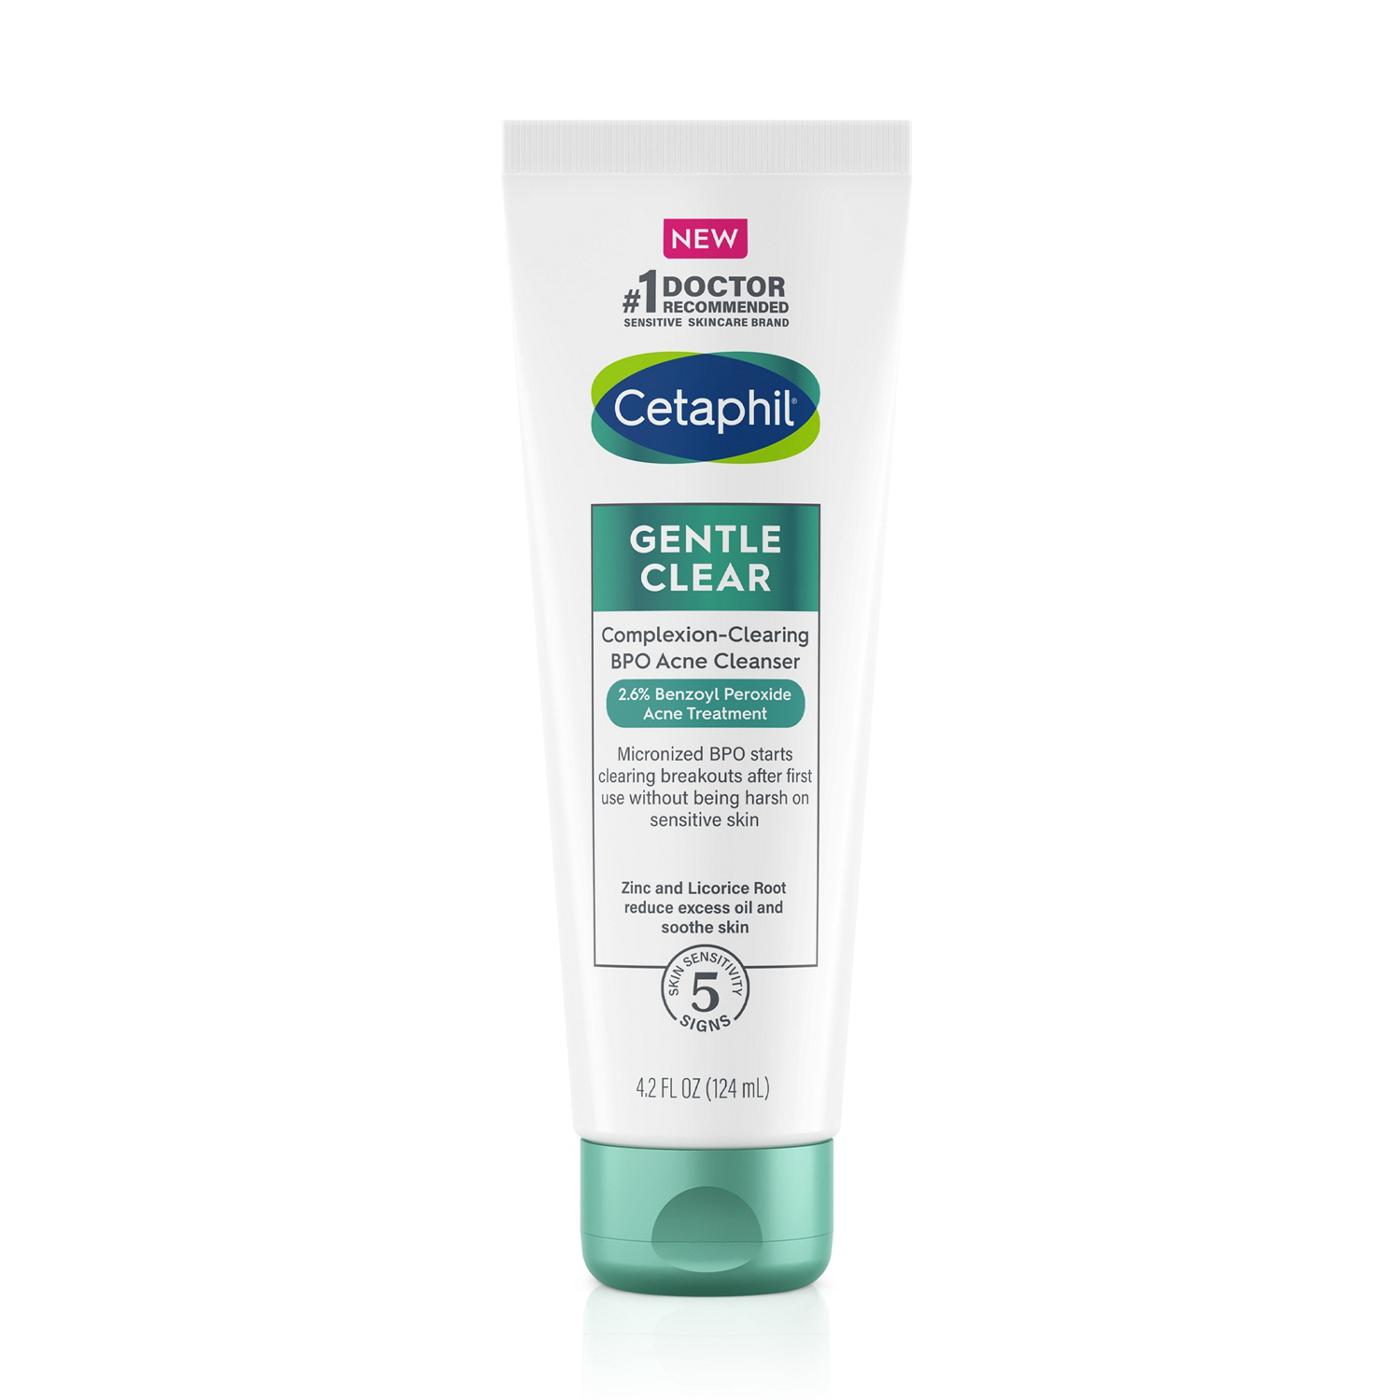 Cetaphil Gentle Clear Complexion-Clearing BPO Acne Cleanser; image 1 of 4